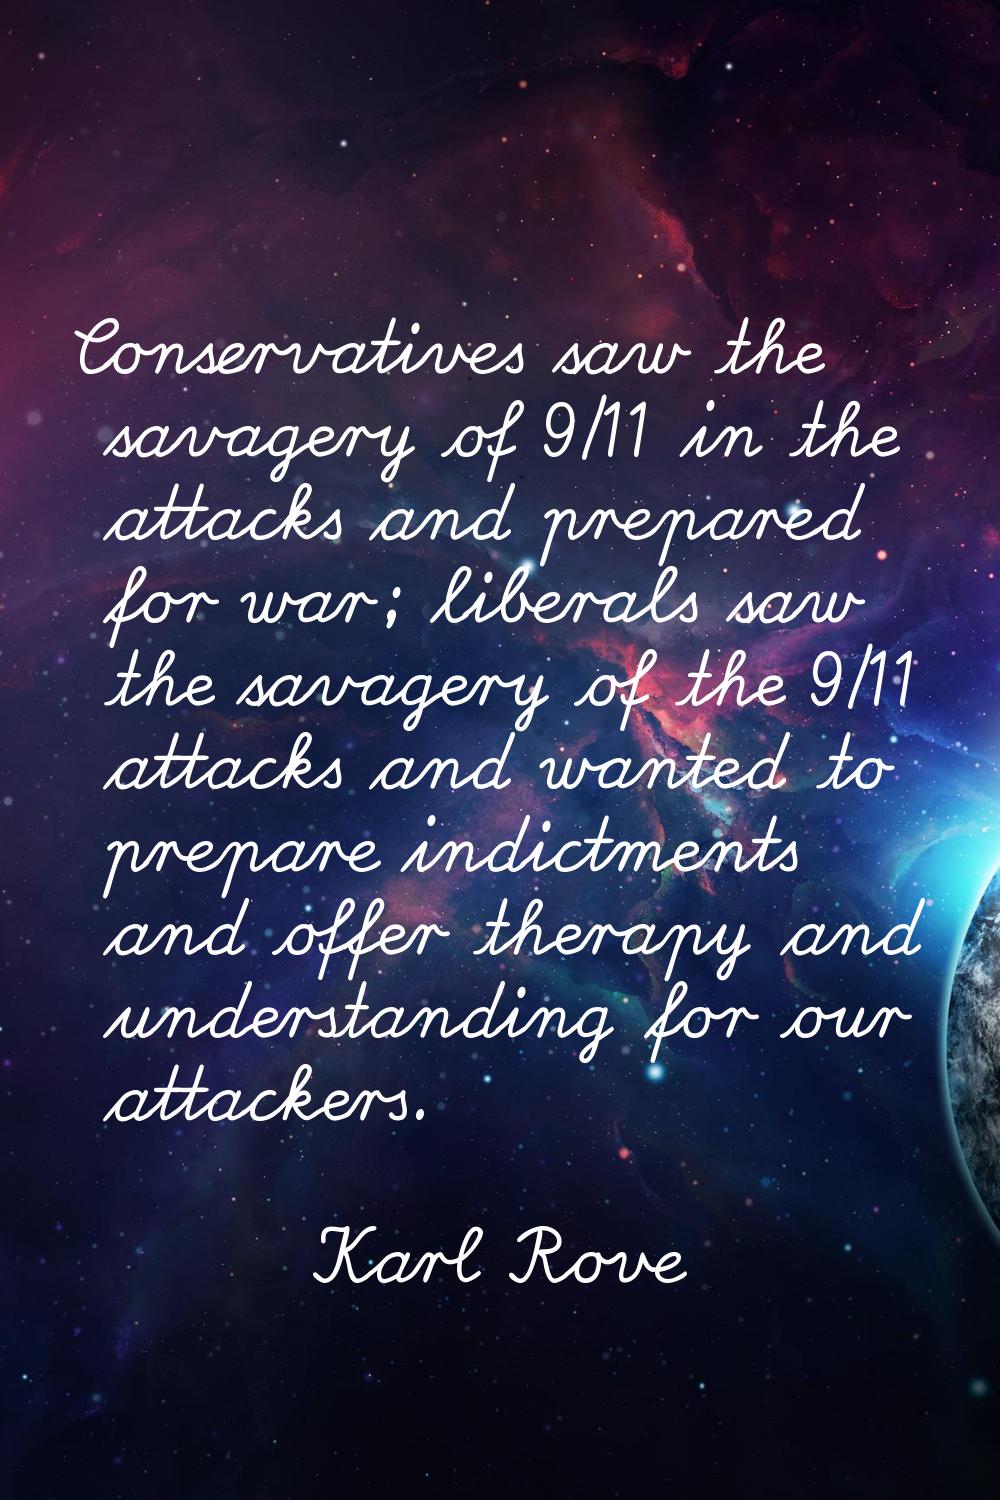 Conservatives saw the savagery of 9/11 in the attacks and prepared for war; liberals saw the savage